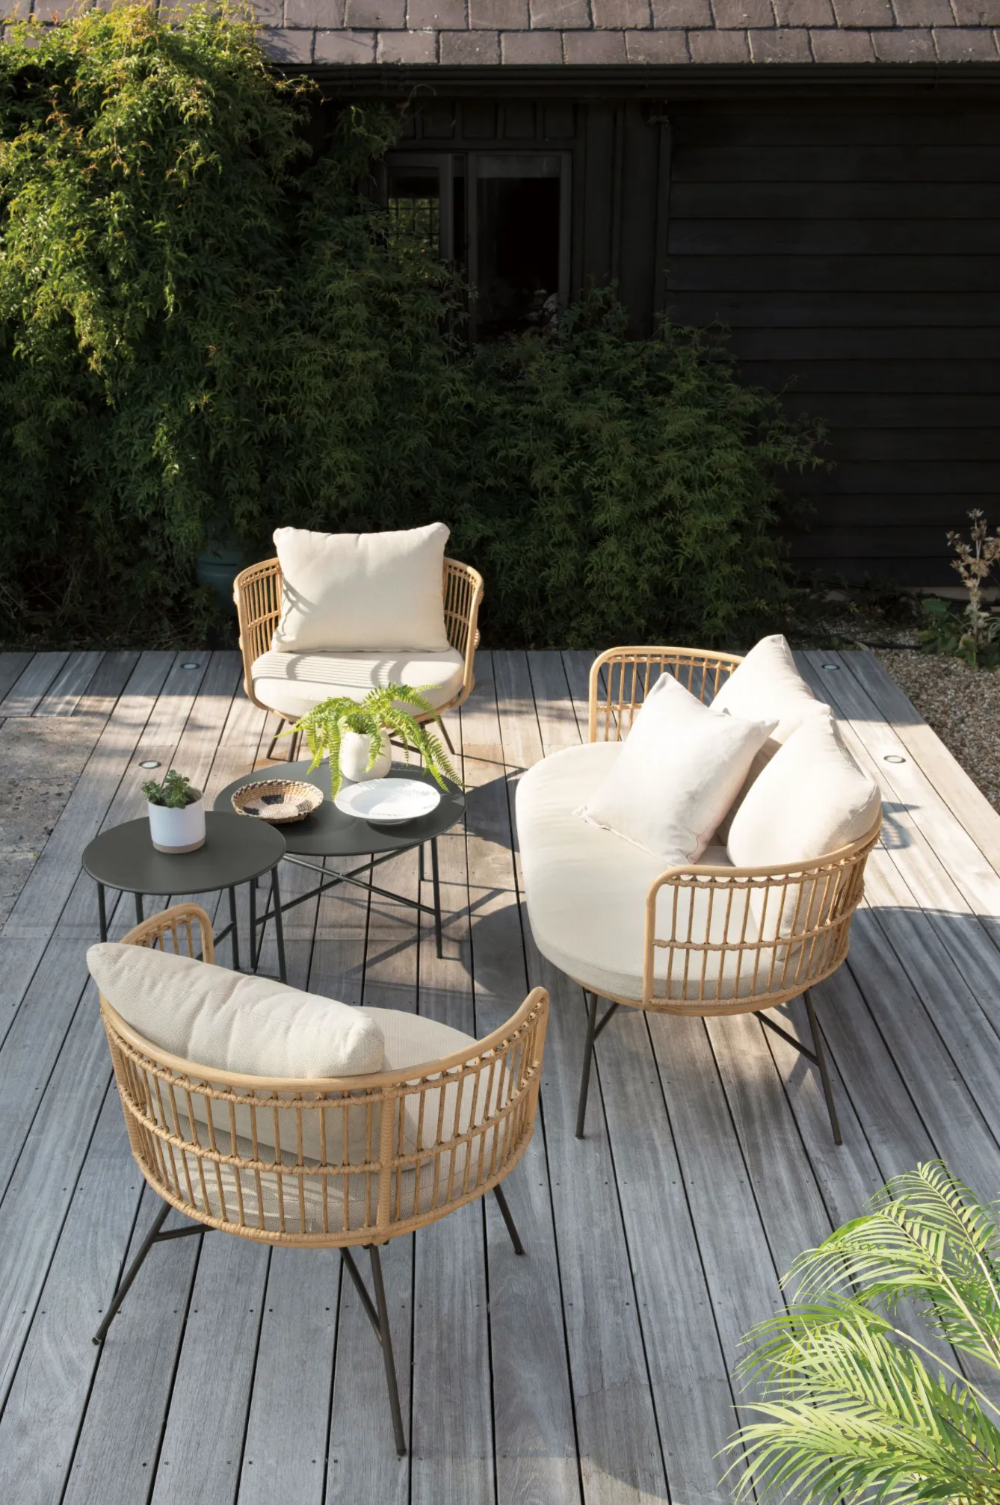 The Best Garden Chairs for Comfort and
Style